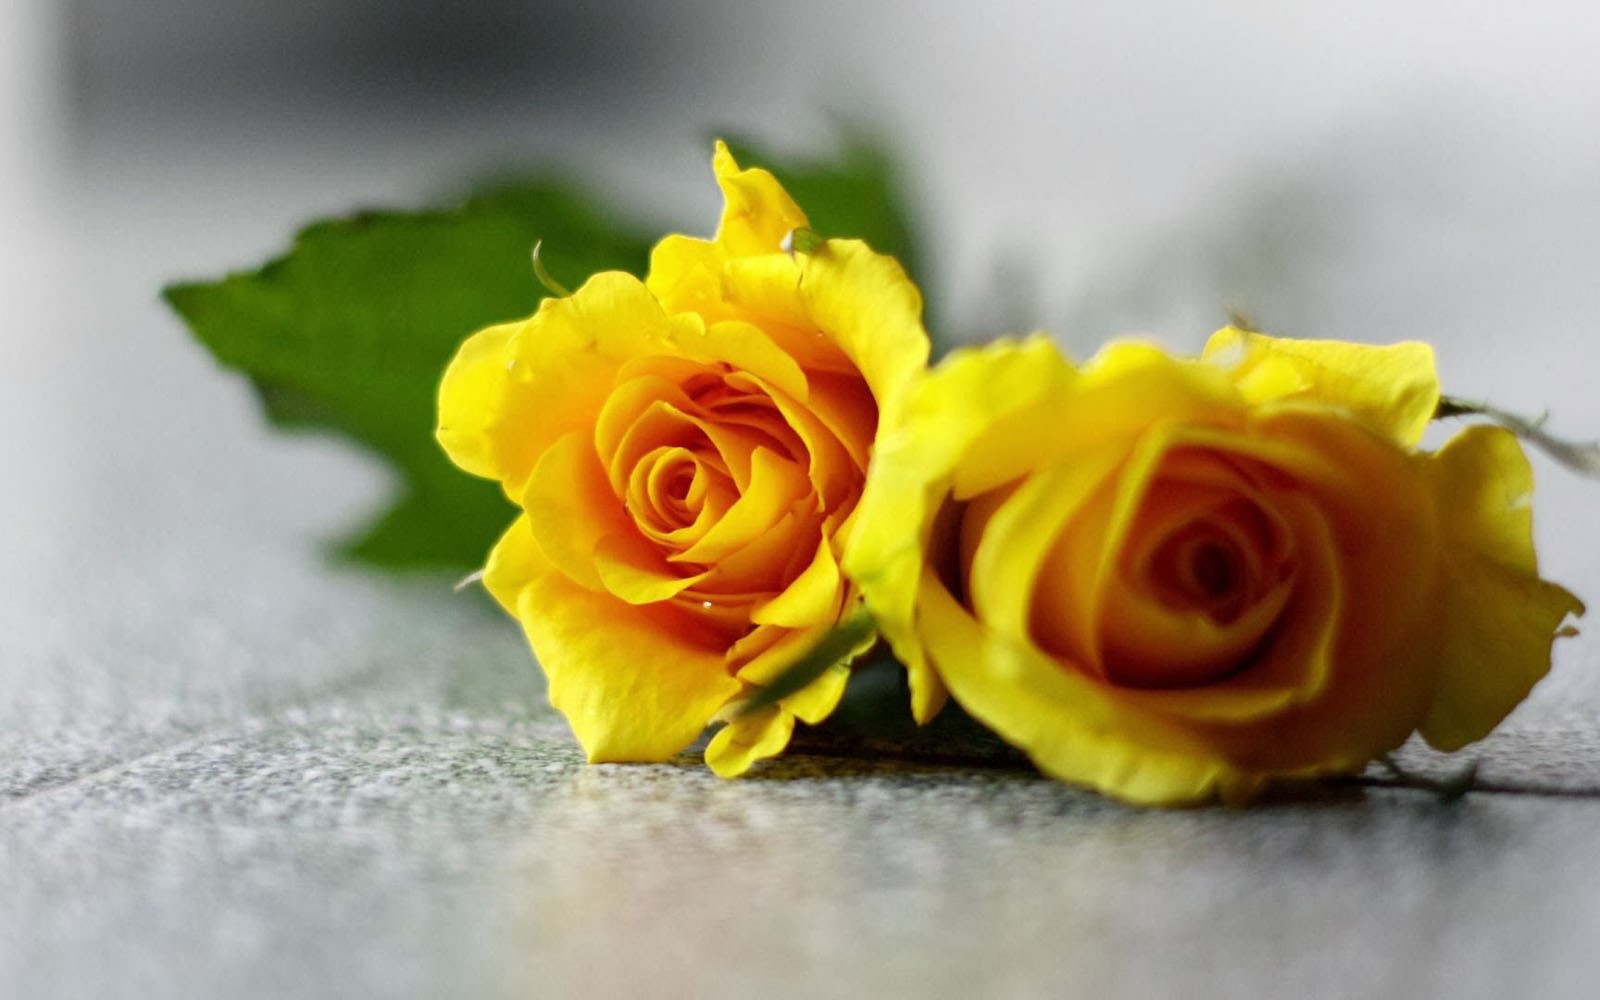 beautiful pictures of roses for wallpaper,flower,yellow,rose,garden roses,rose family